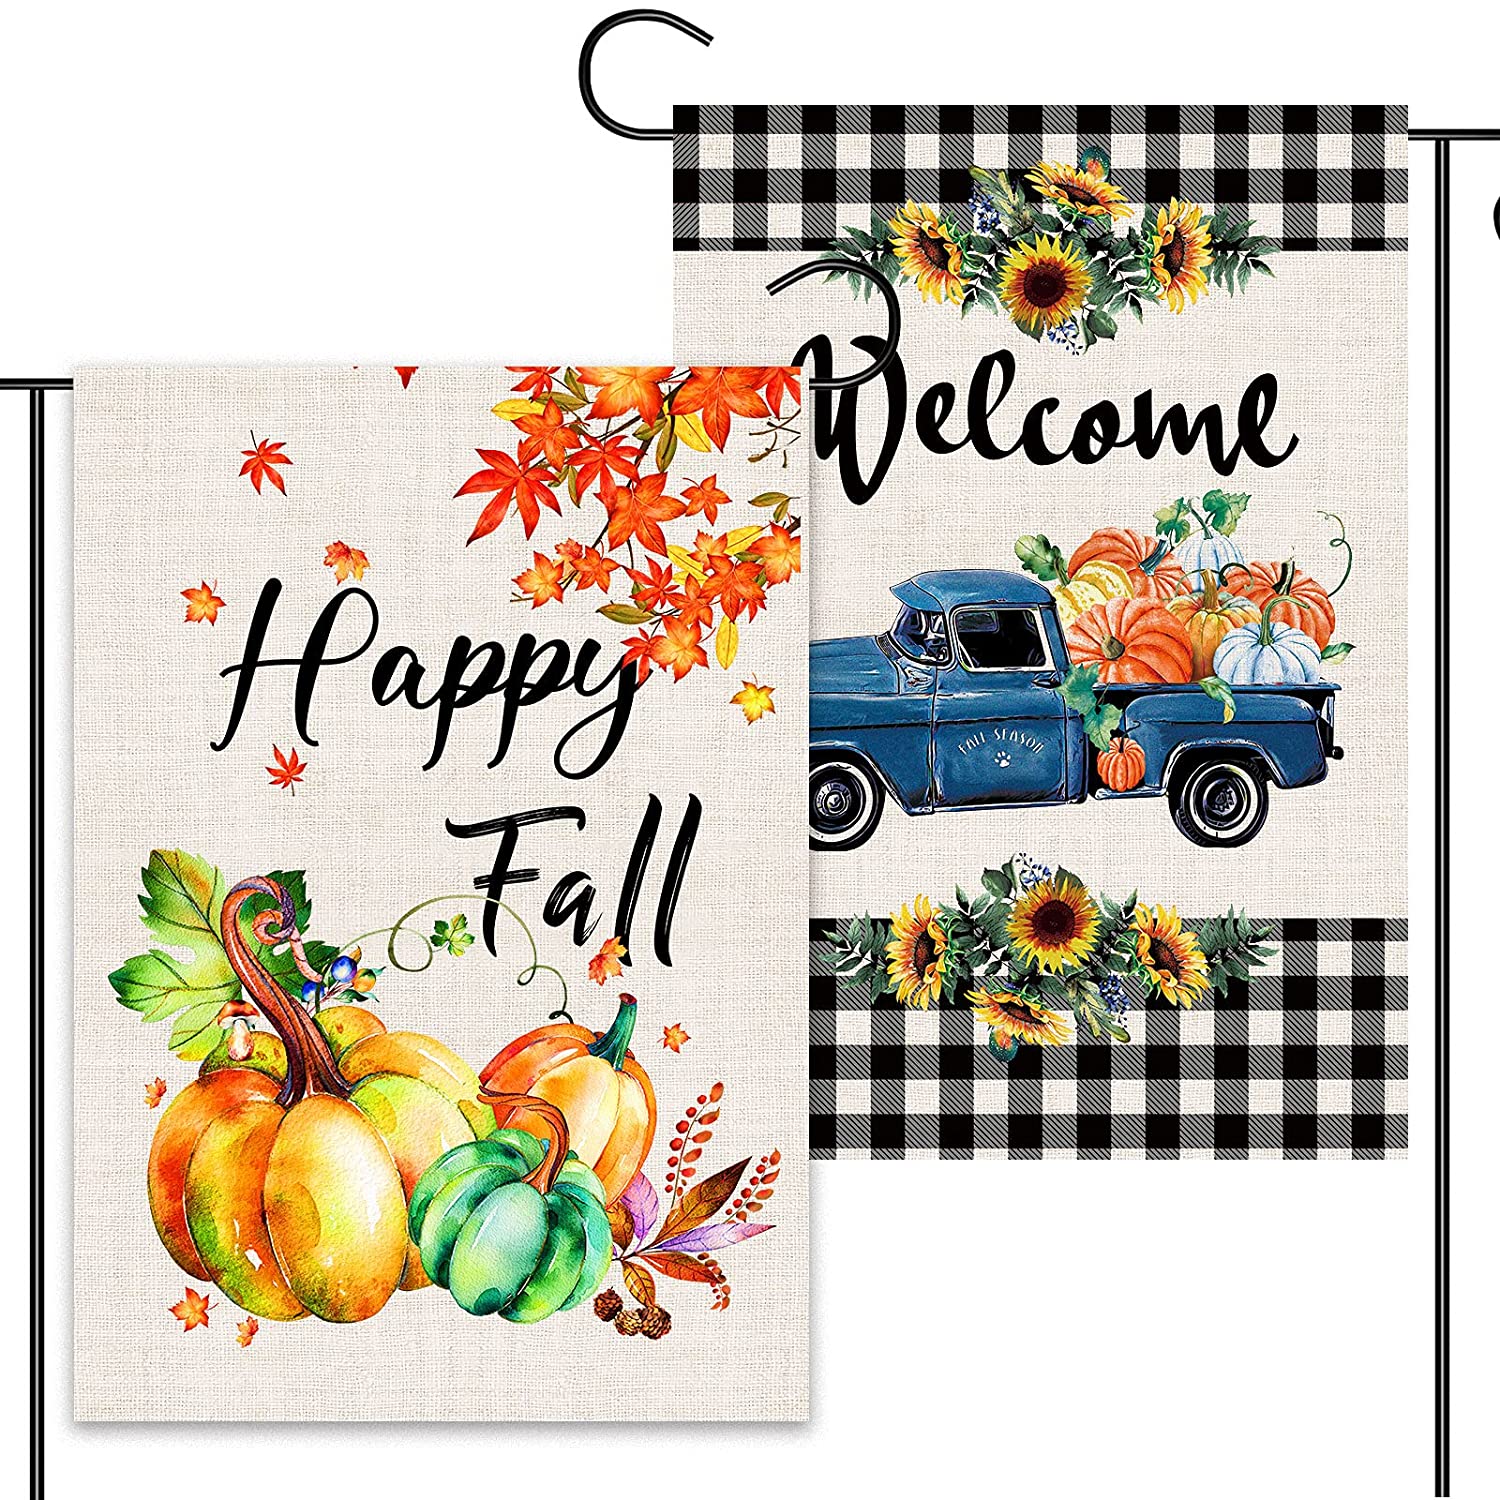 2 Pcs Double Sided Thanksgiving Fall Garden Flags 12 x 18 (Plaid, Truck)